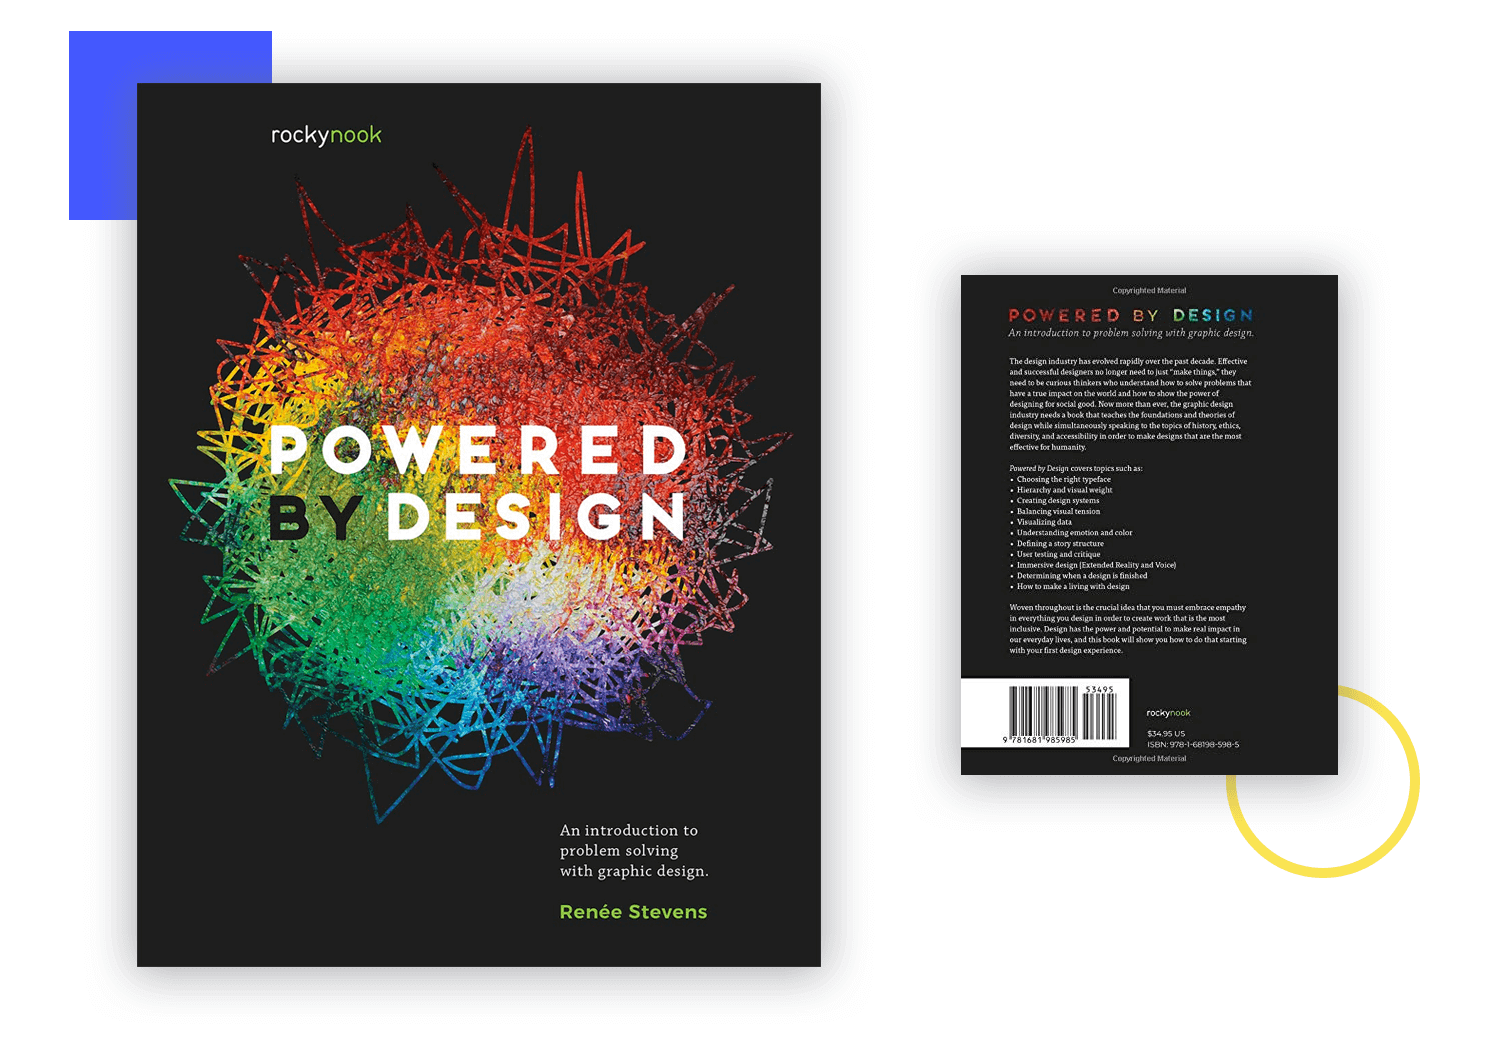 powered by design - web design book